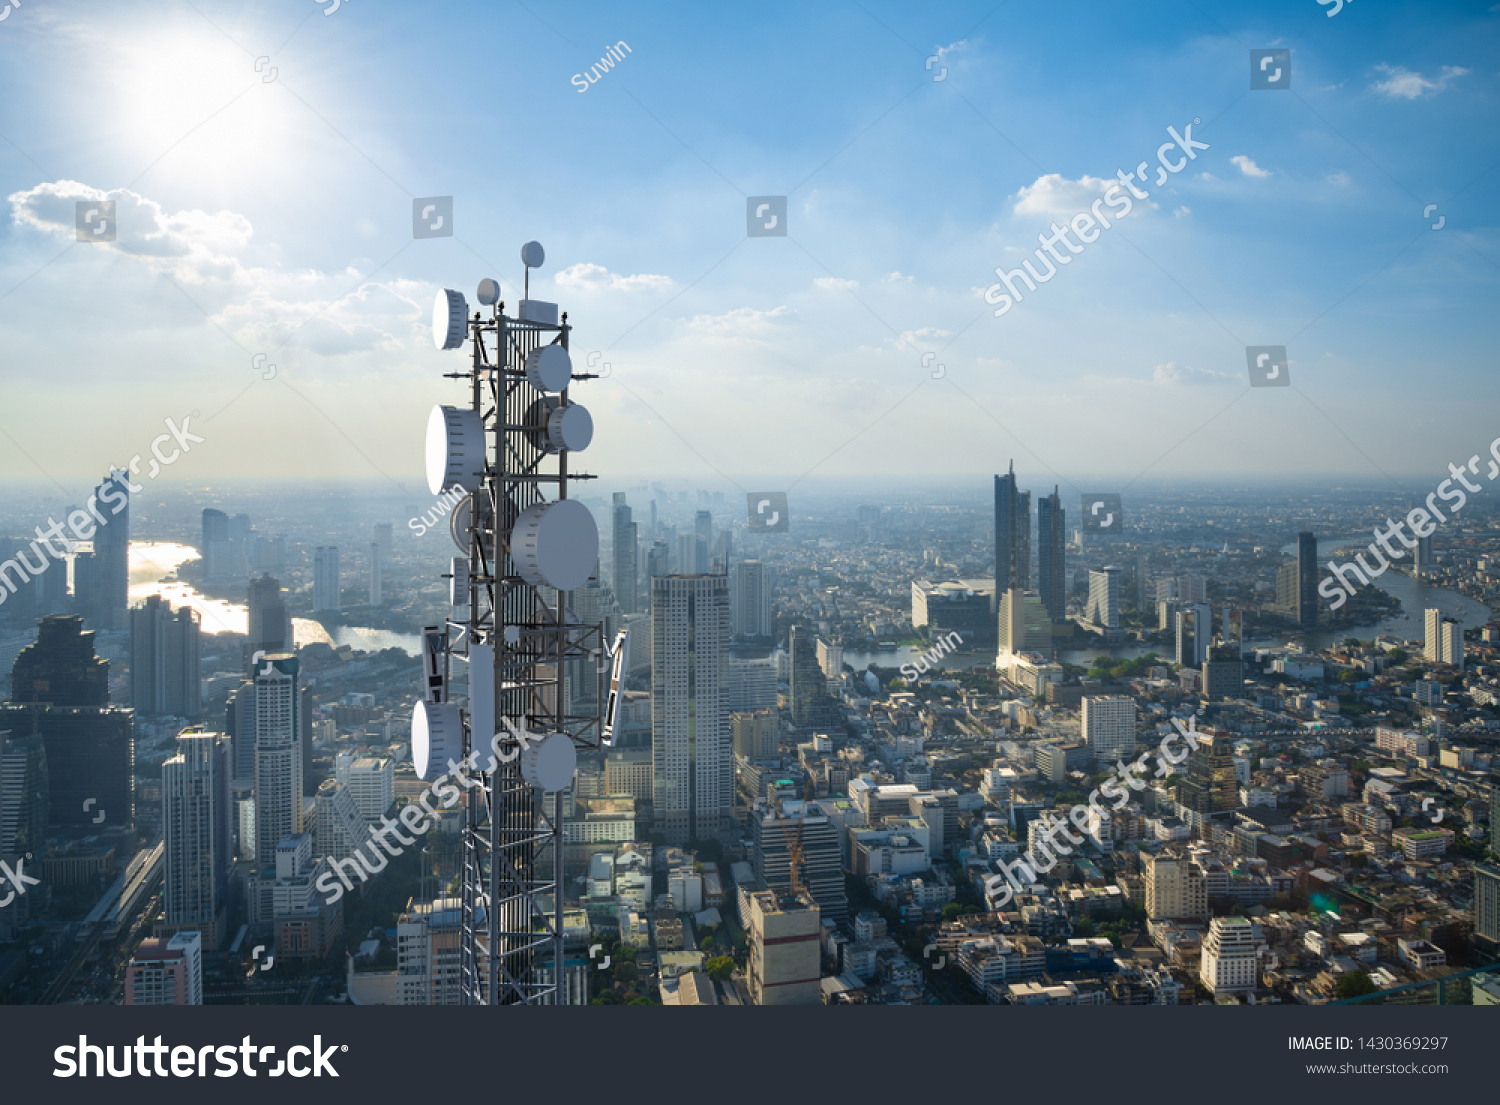 Telecommunication tower with 5G cellular network antenna on city background #1430369297